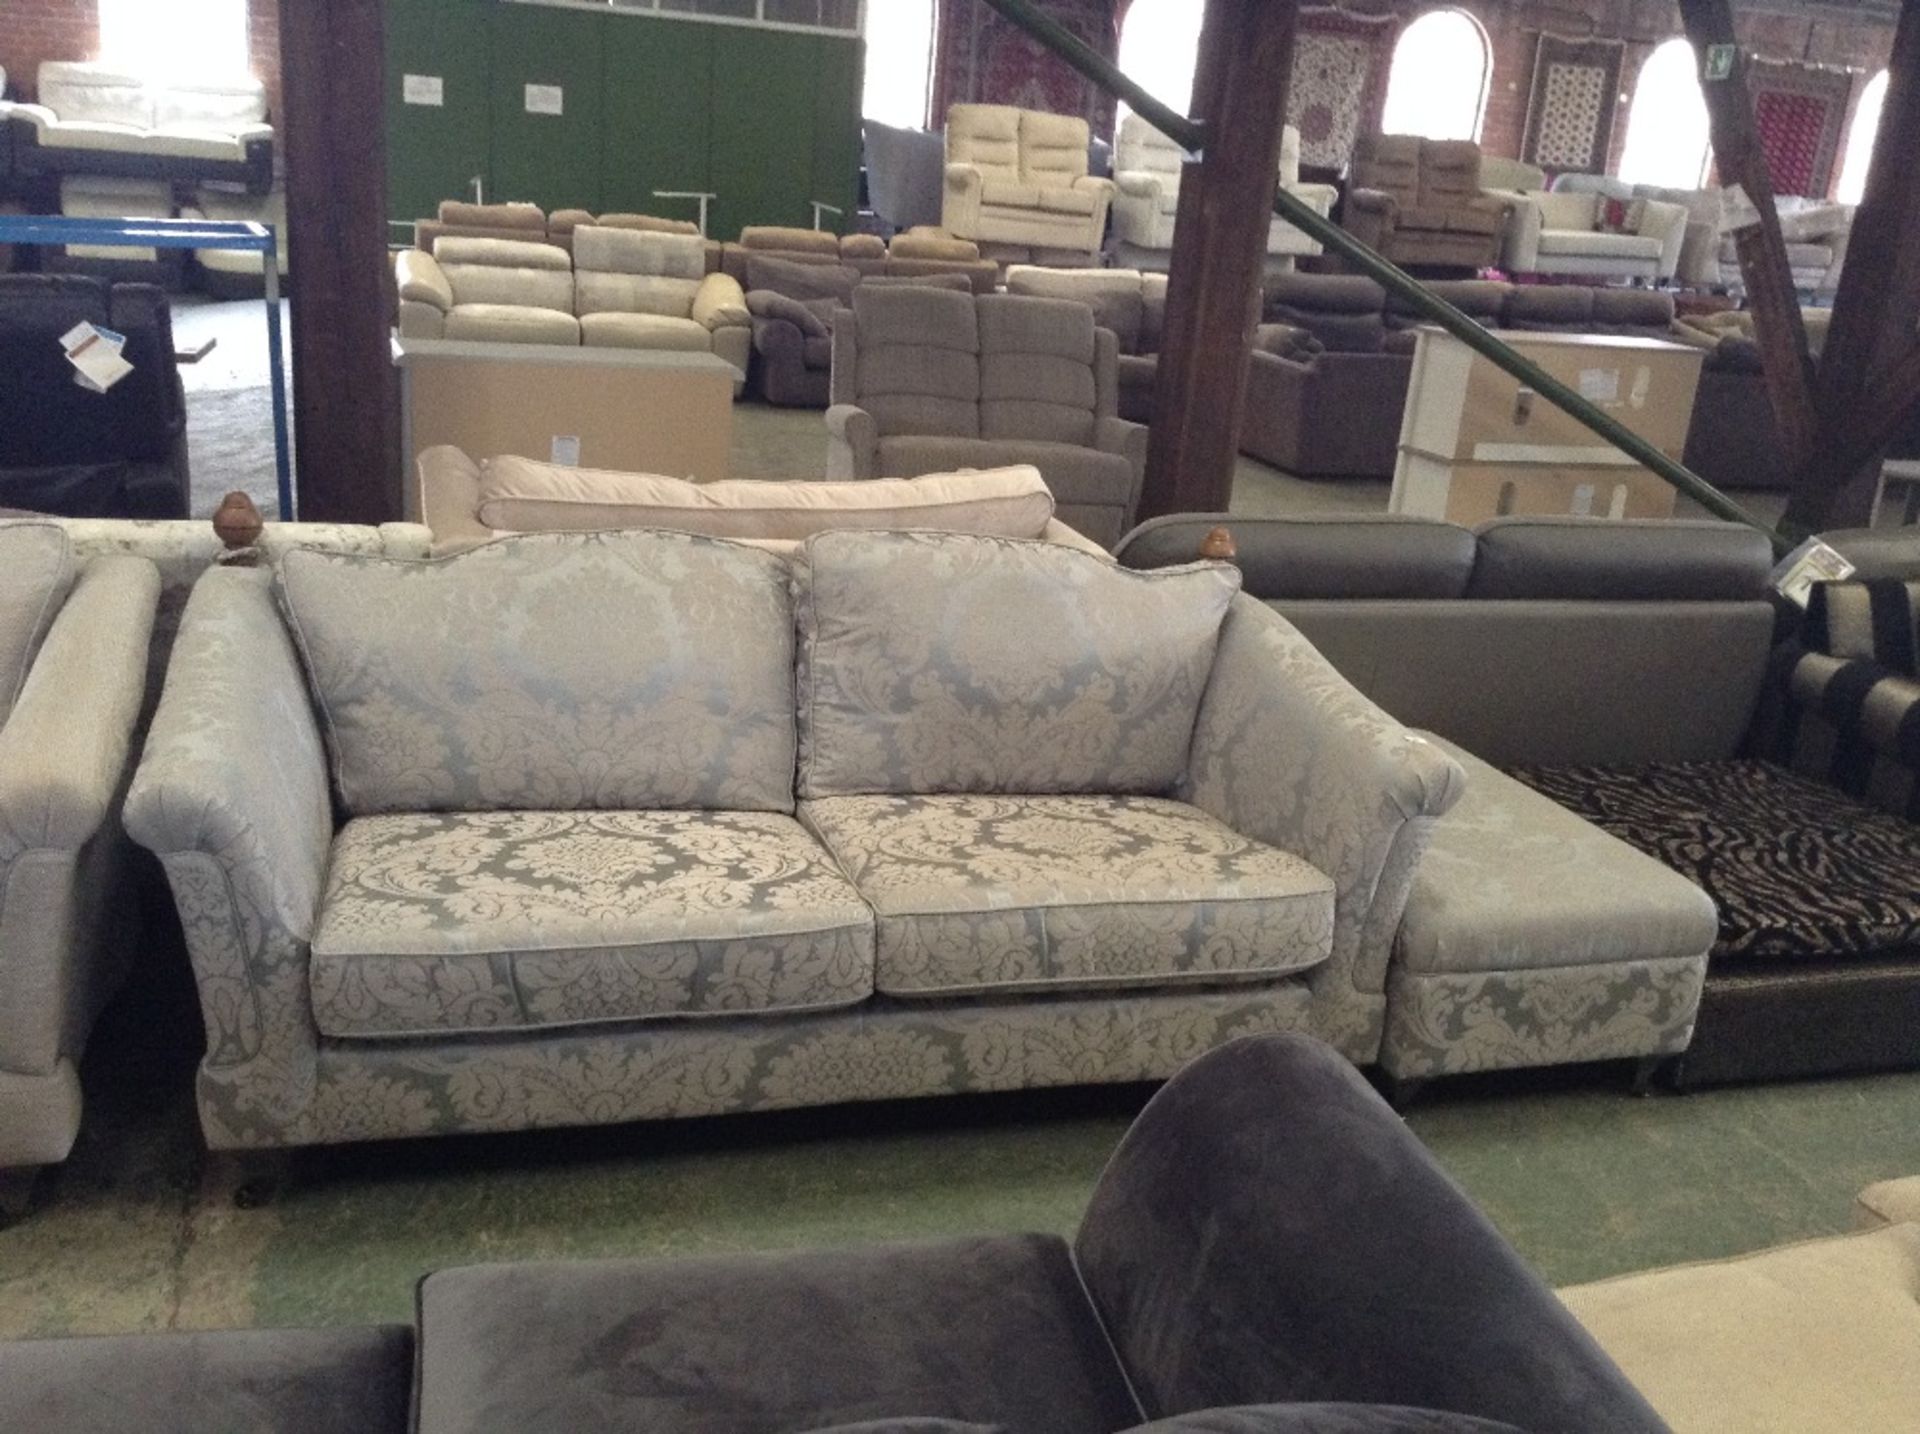 LIGHT BLUE AND NATURAL FLORAL PATTERNED SPLIT 4 SEATER SOFA, 3 SEATER SOFA, SNUG CHAIR, FOOTSTOOL AN - Image 2 of 4